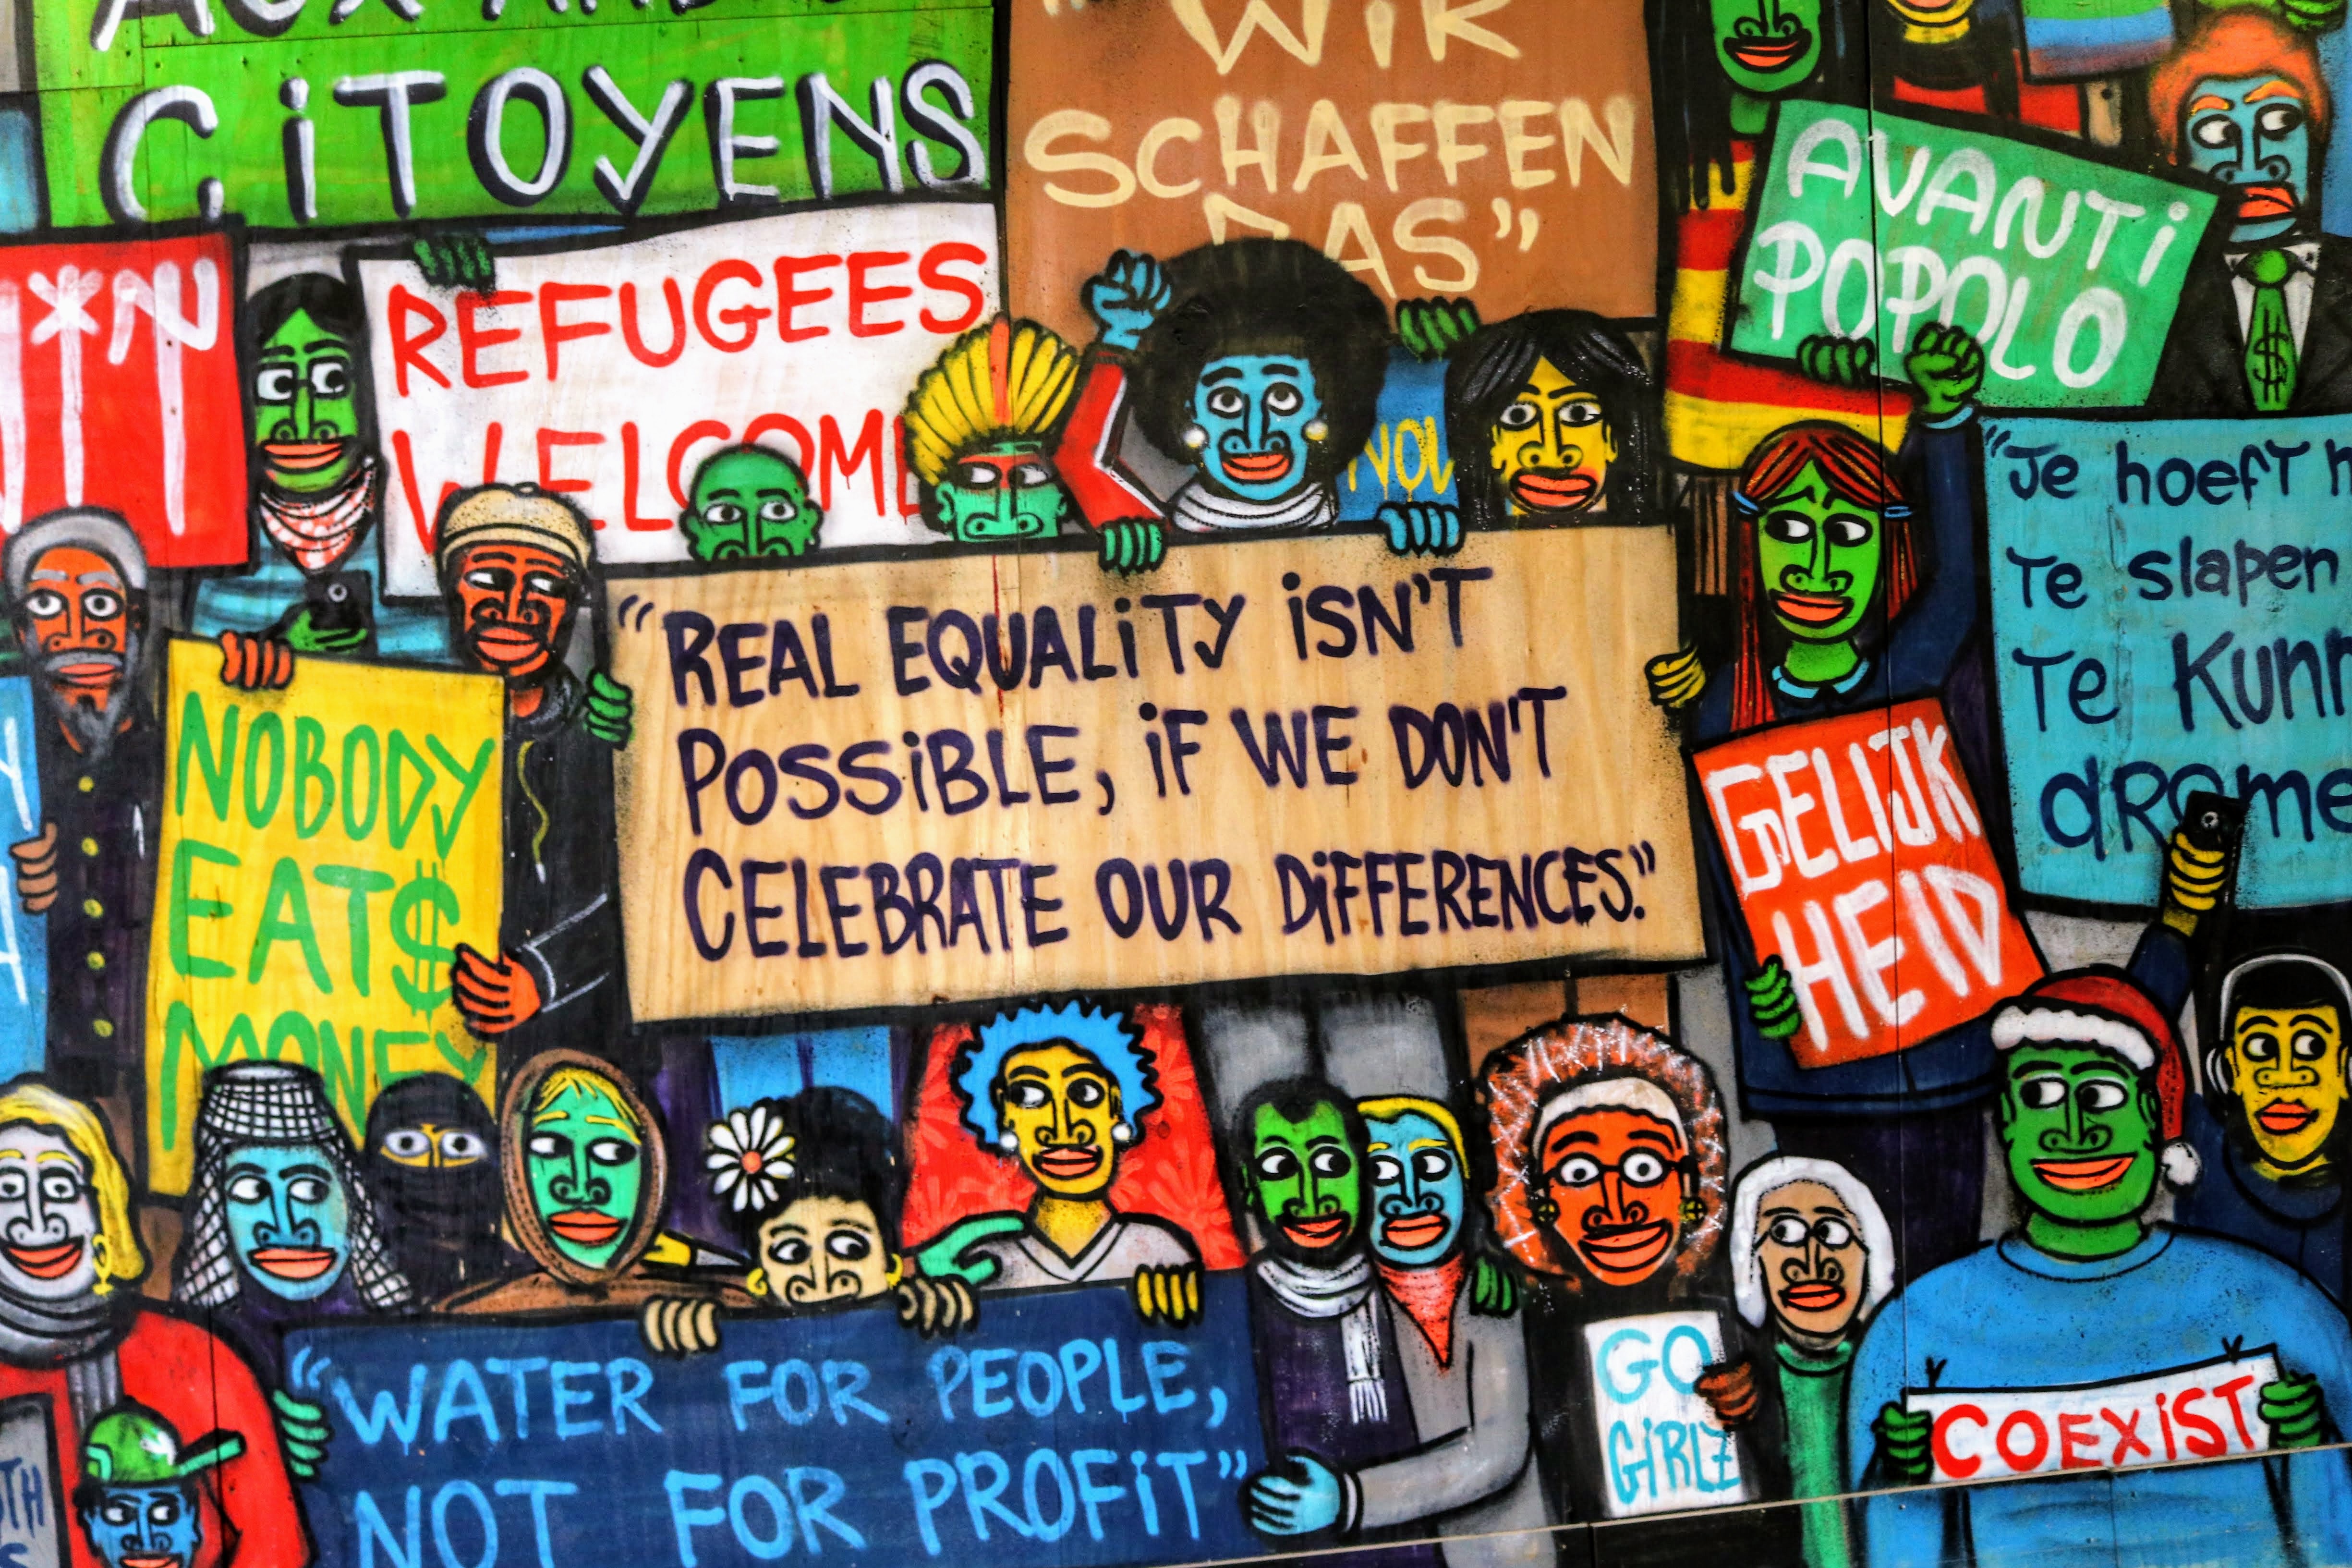 Colorful grafitti saying "Real equality isn't possible if we don't celebrate our differences